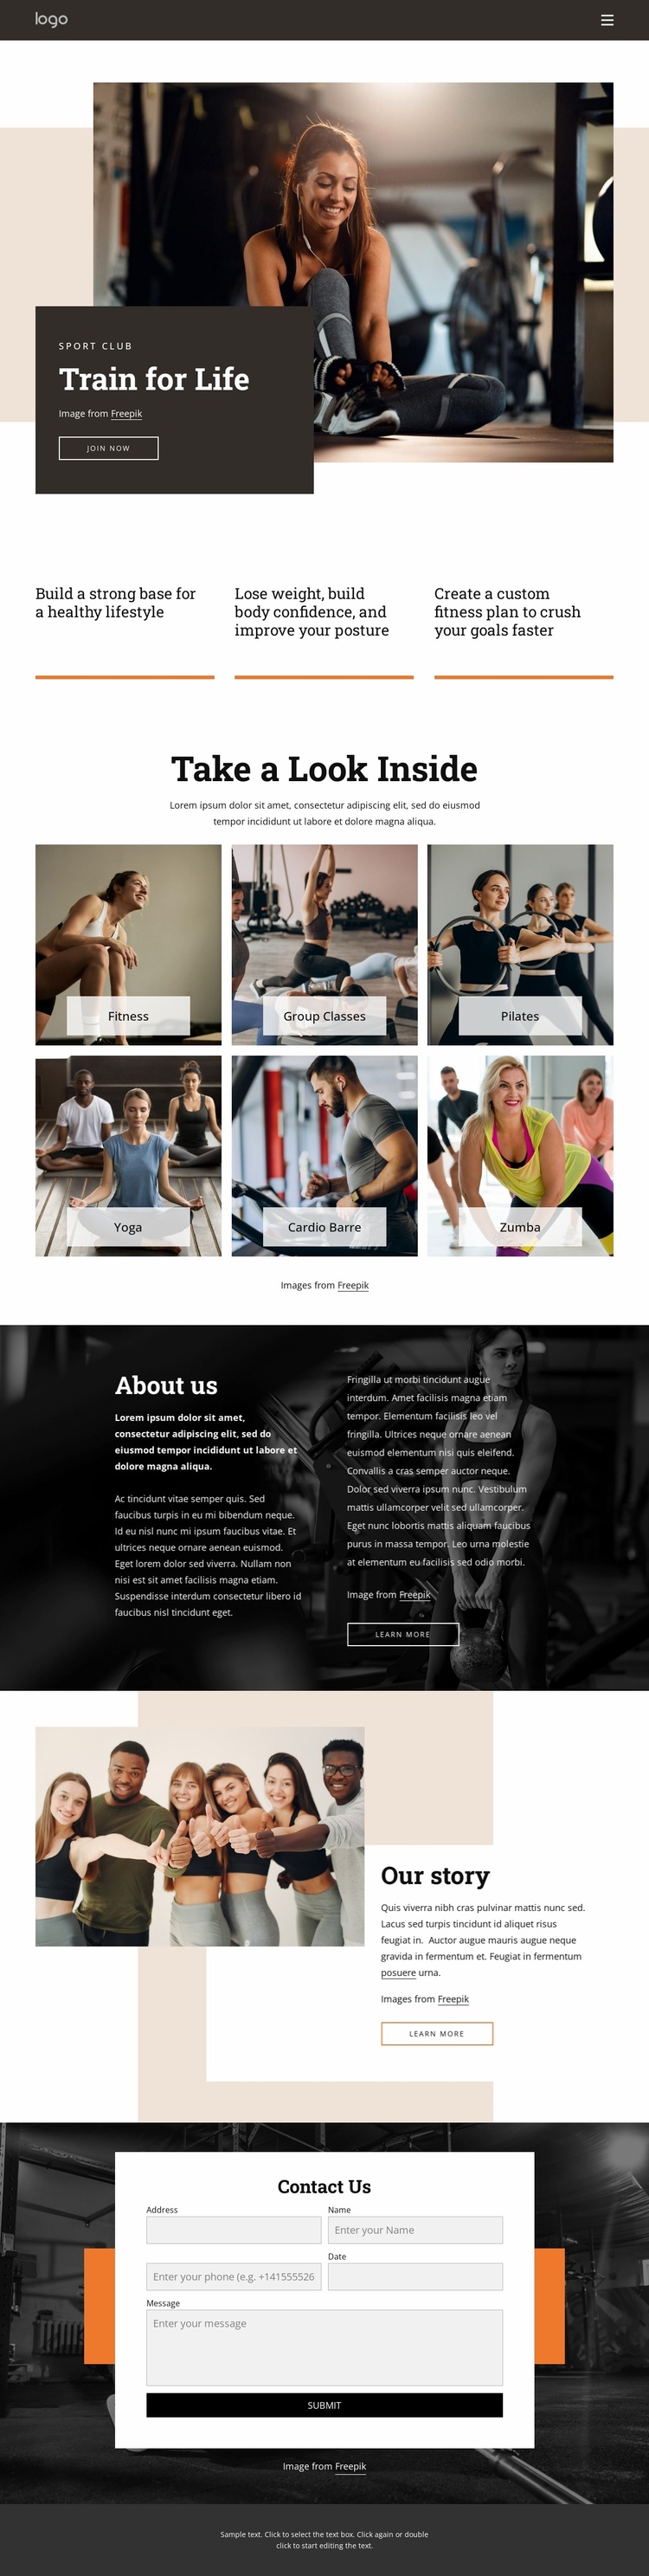 Get moving with our range of classes Ecommerce Website Design